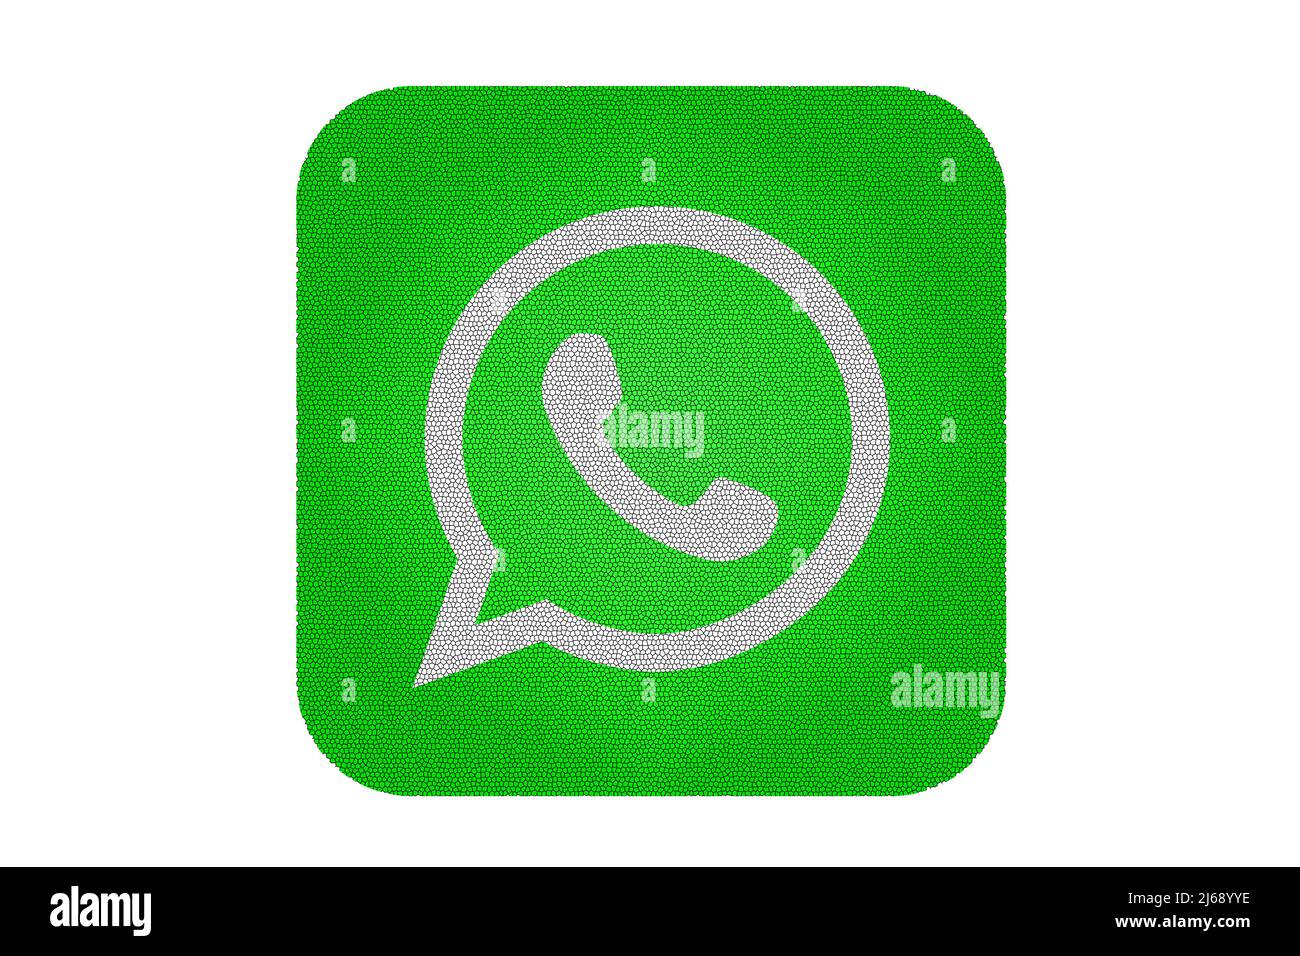 WhatsApp. WhatsApp icon. Telephone icon in white and green square color. White color background. Illustration. Stock Photo